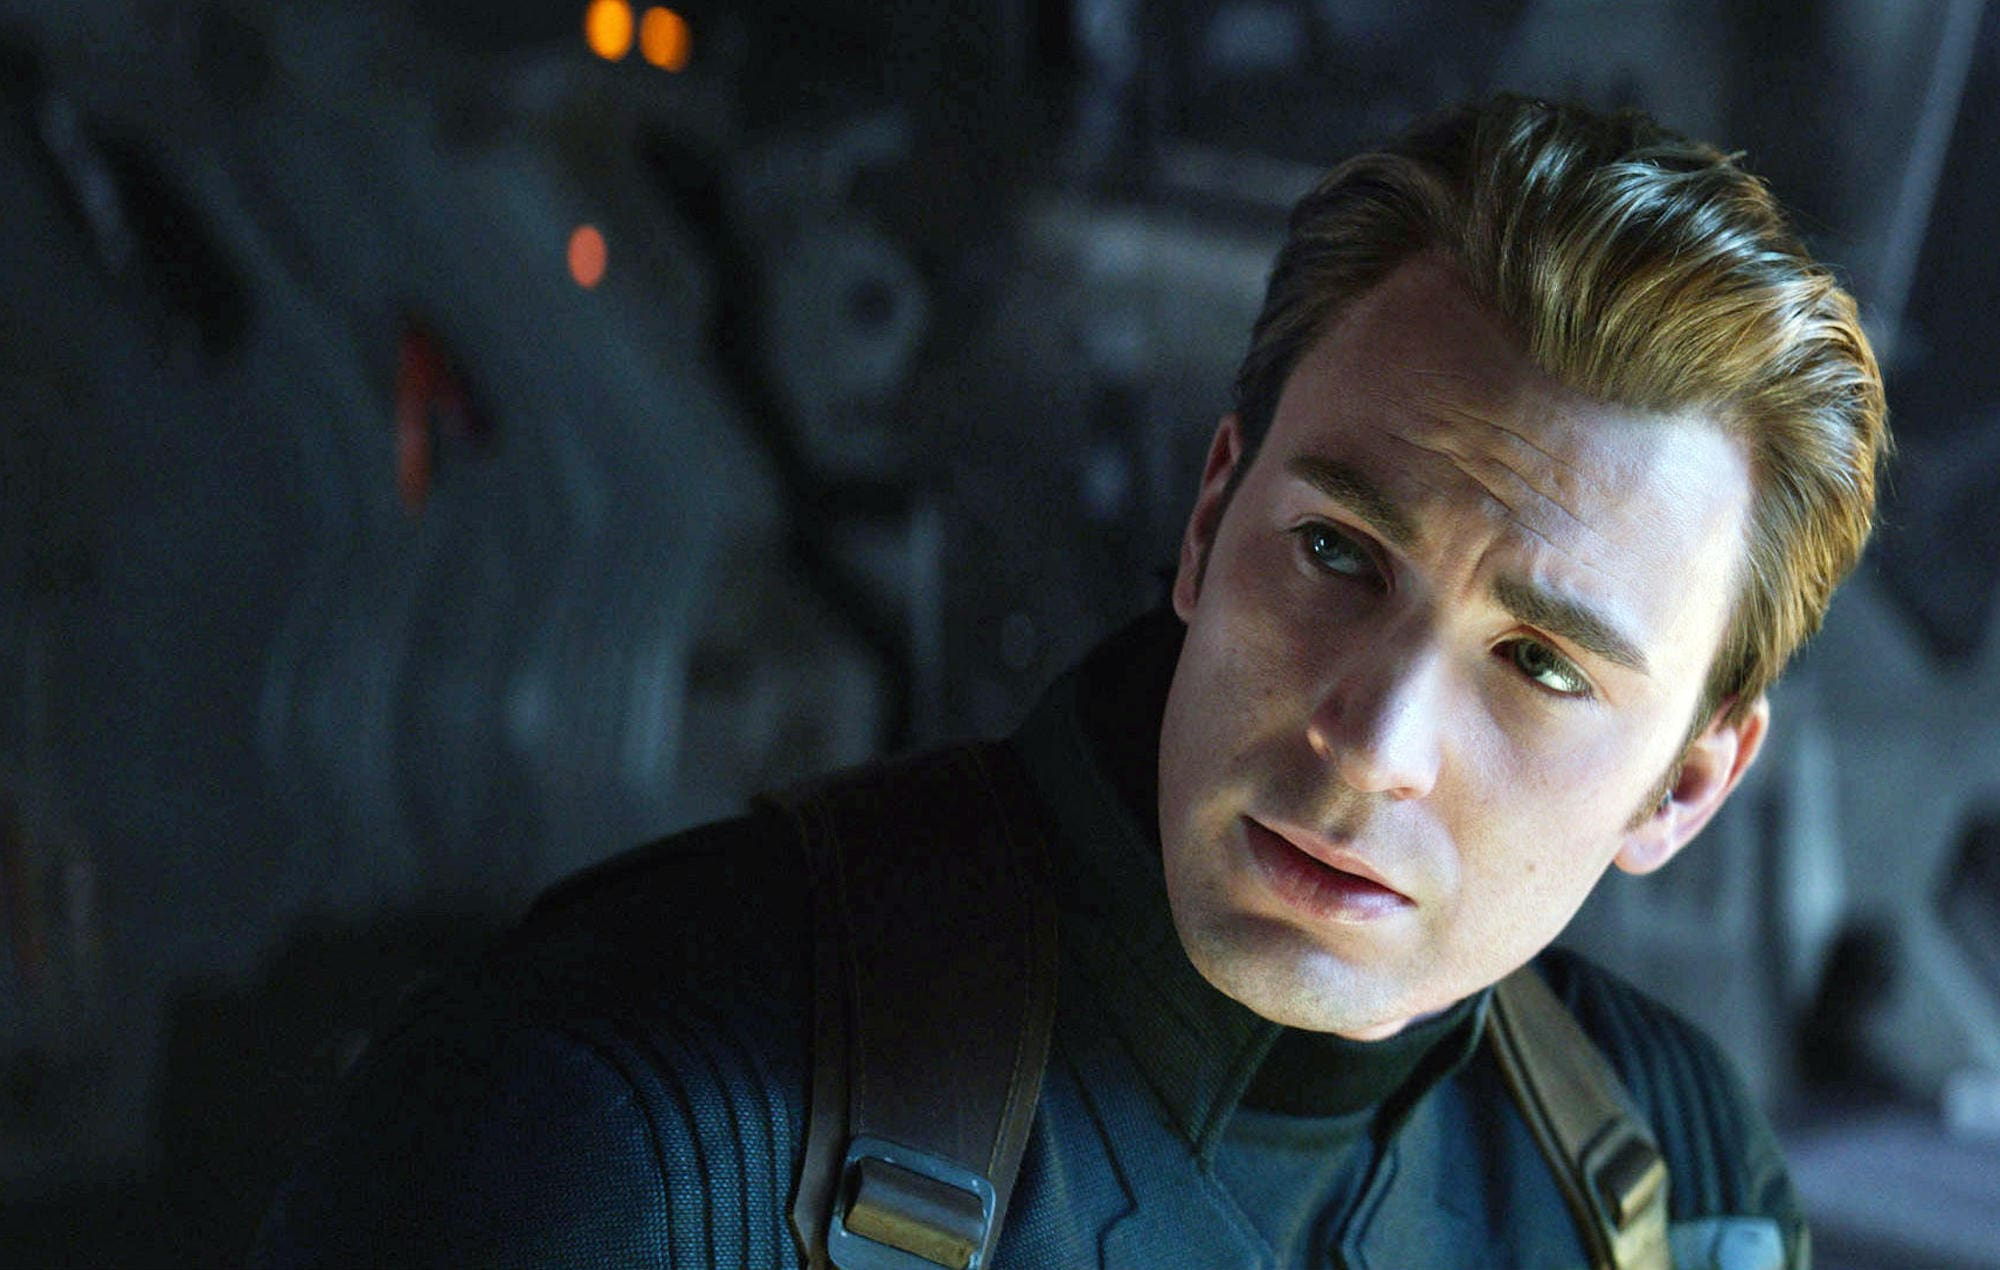 Chris Evans Talks About The Physical Demands Of Playing Captain America